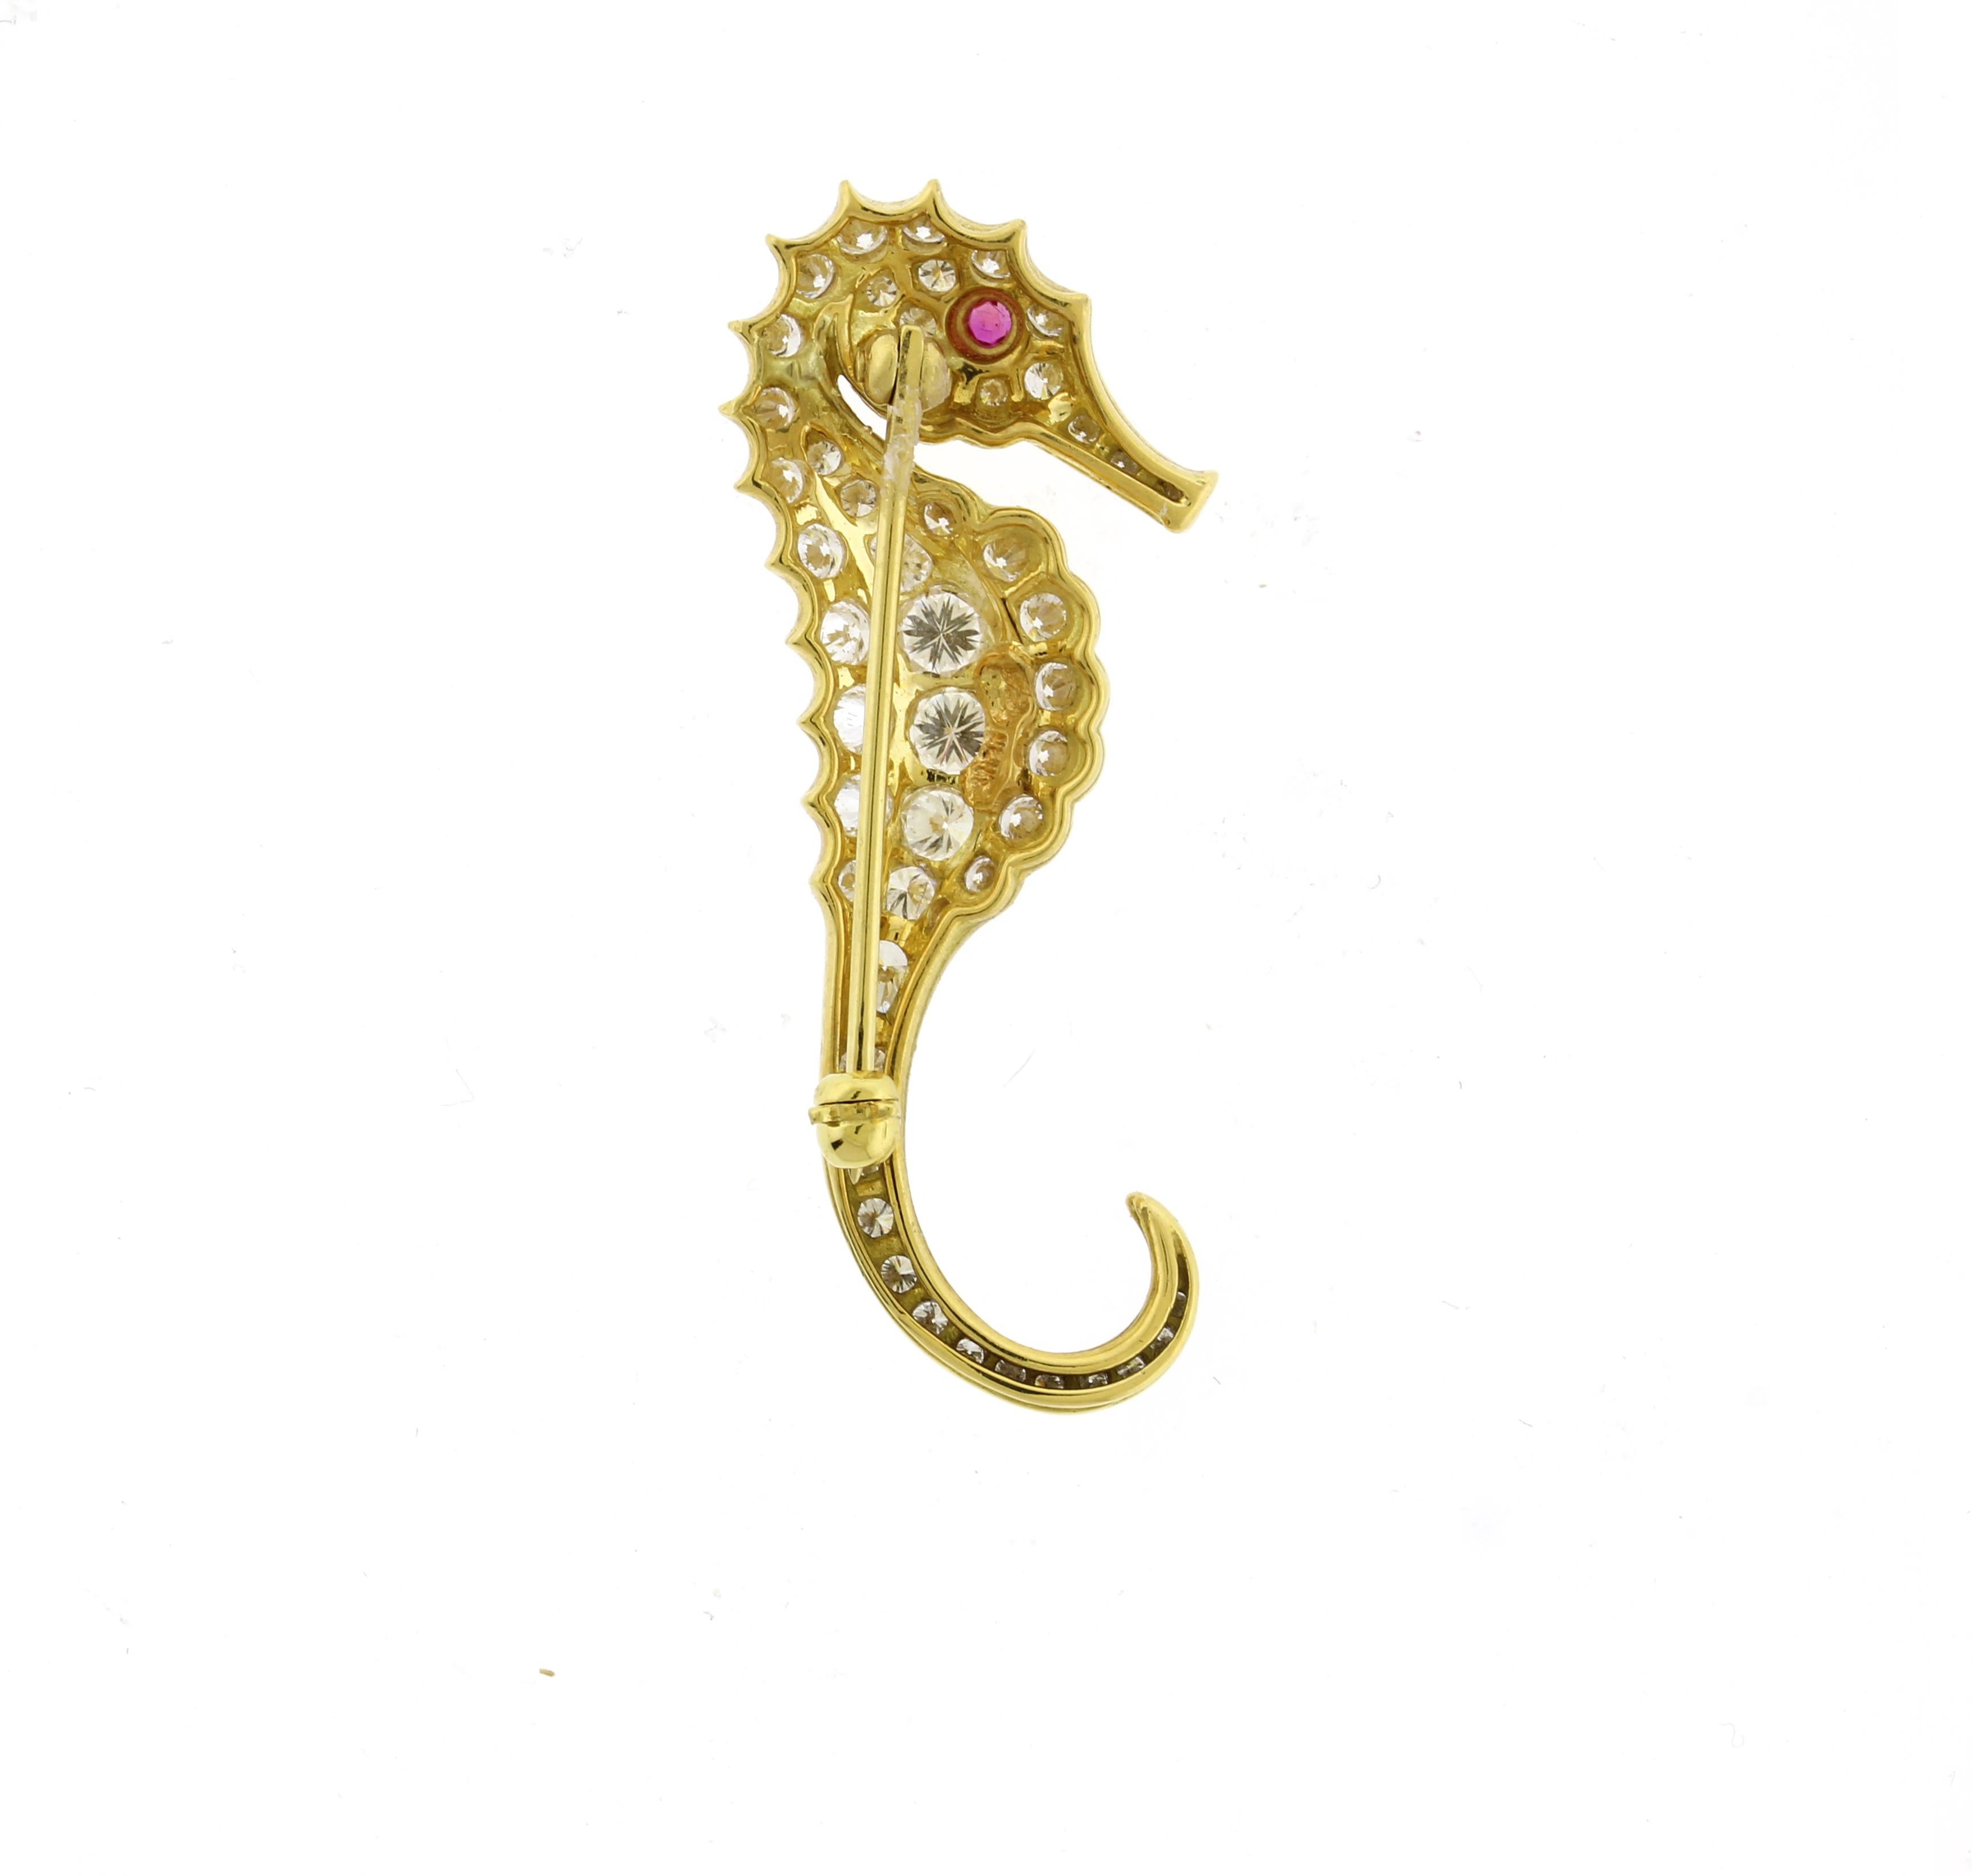 This gorgeous brooch has 1.78 carats of diamonds.  The seahorse is about 1.5 inches in length.
• Metal: 18kt Yellow Gold
• Designer: Pampillonia Jewelers
• Circa: 2023
• Gemstone: Ruby and Diamonds
• Diamonds: 51=1.78carats
• Packaging: Pampillonia